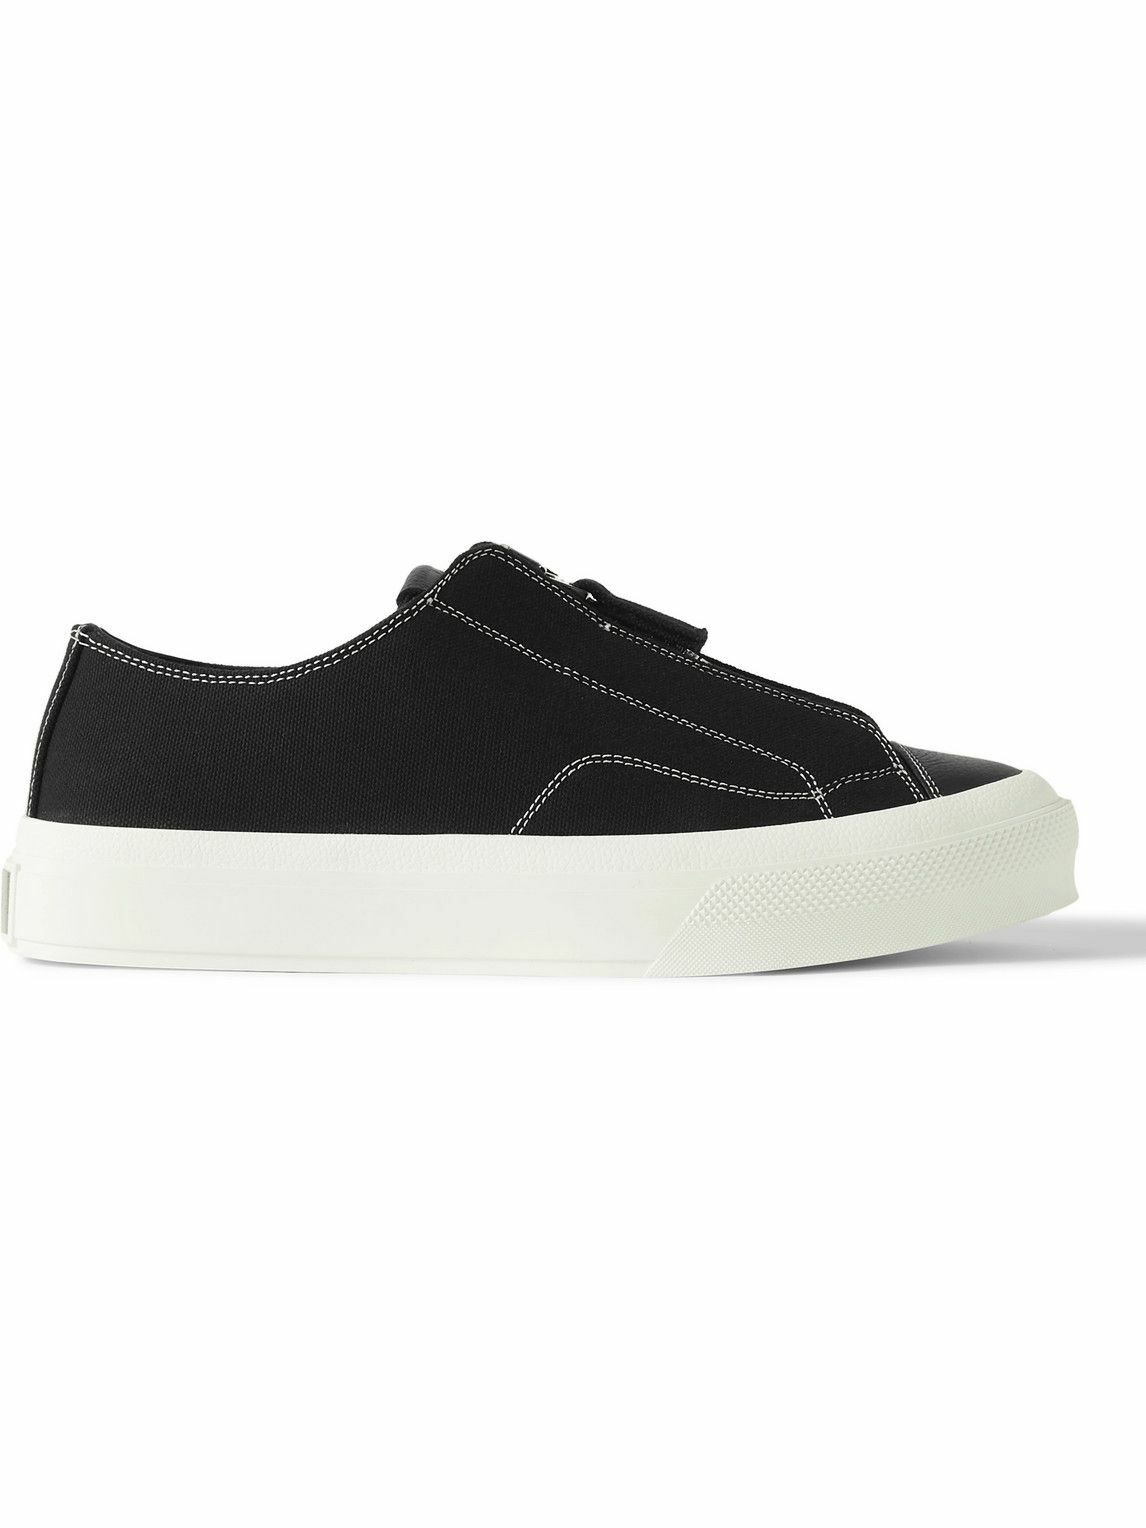 Givenchy - City Low Cap-Toe Canvas and Leather Sneakers - Black Givenchy